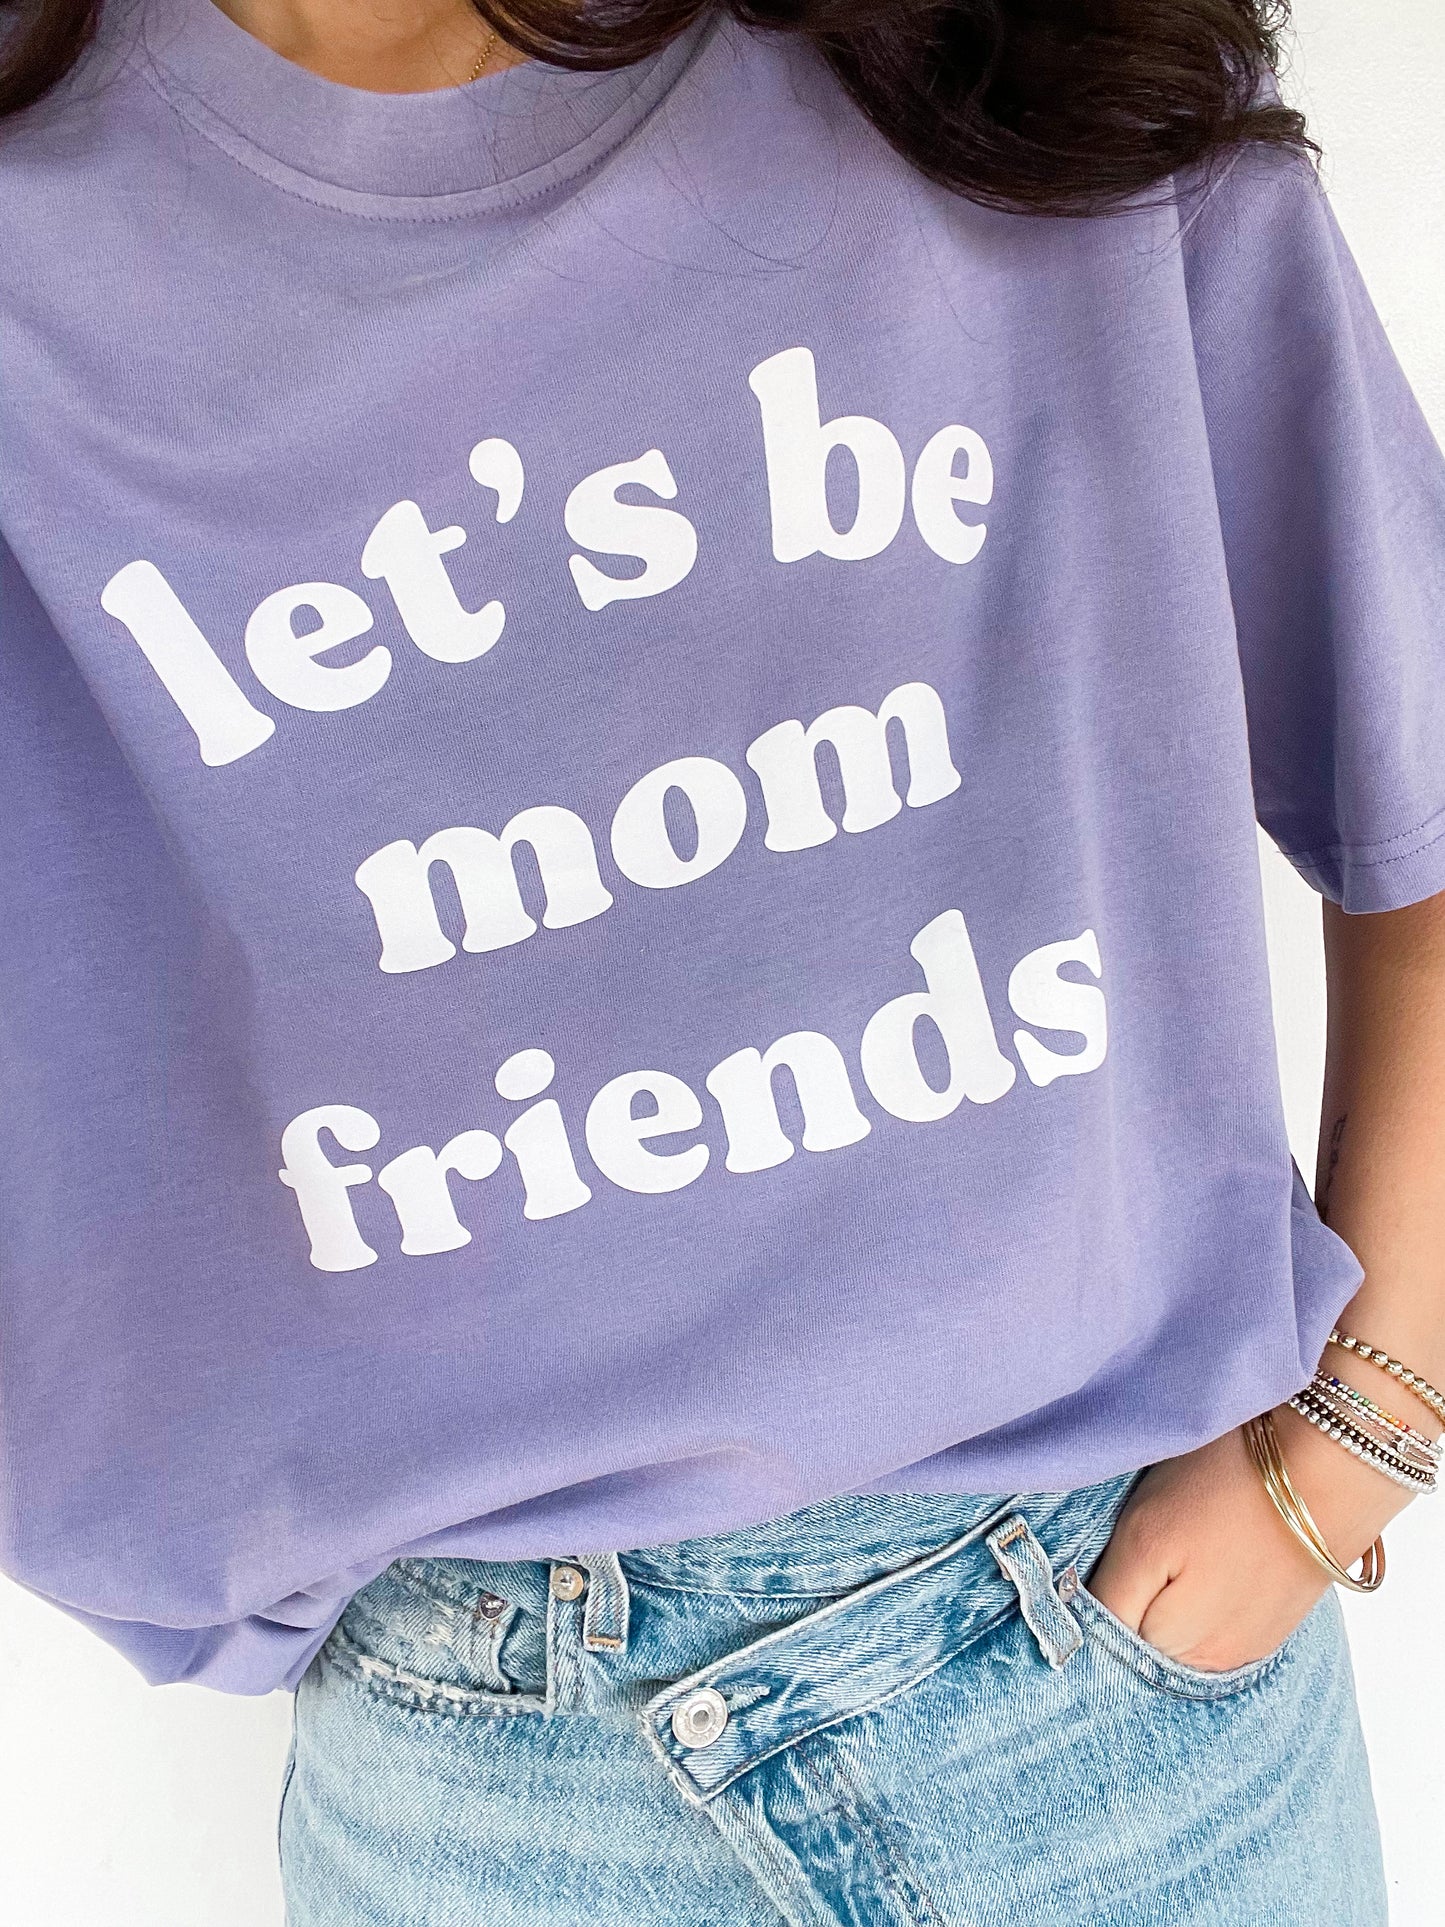 Let’s be mom friends tee